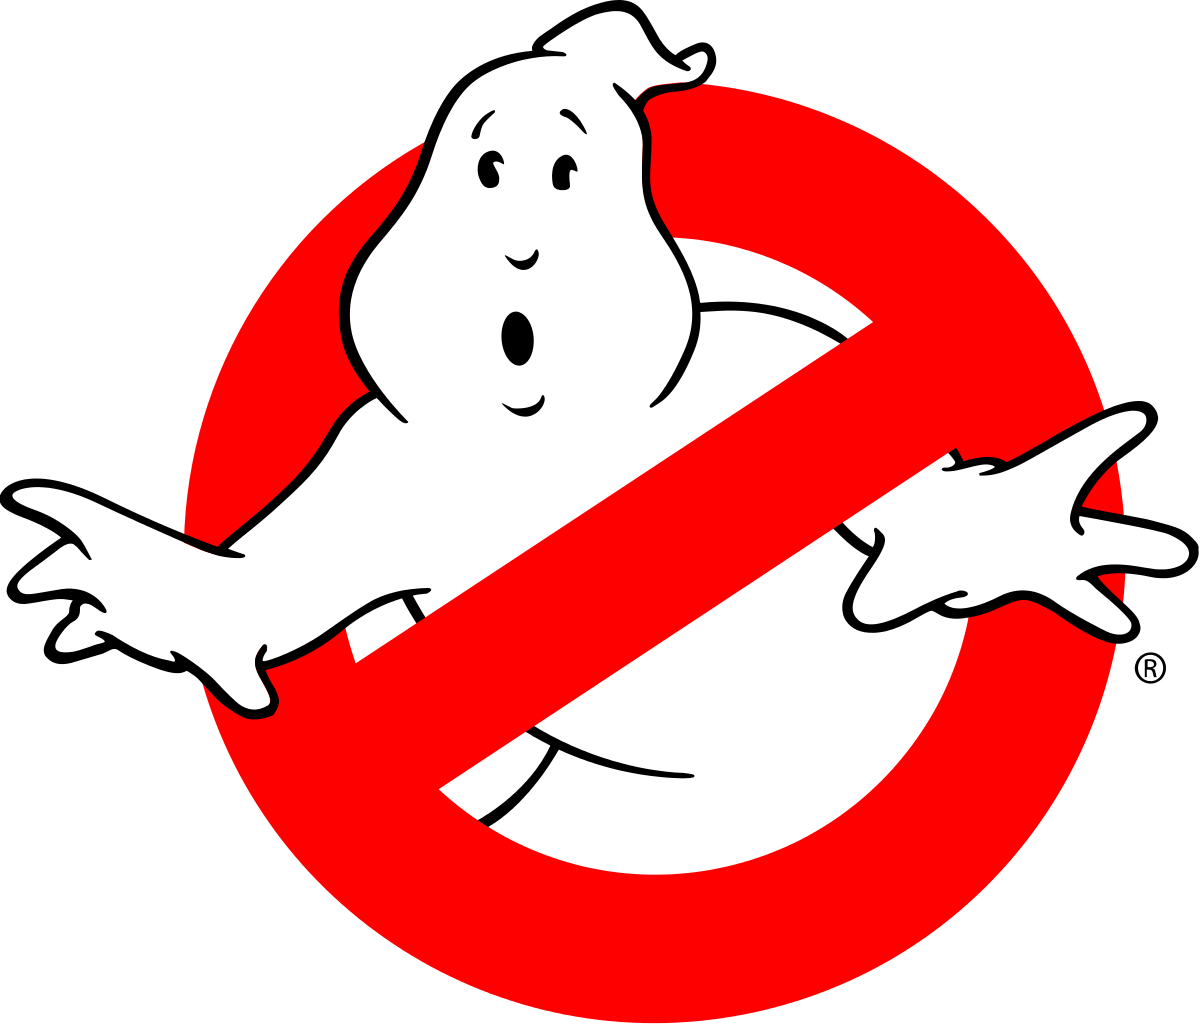 Ghostbusters_logo.svg.png